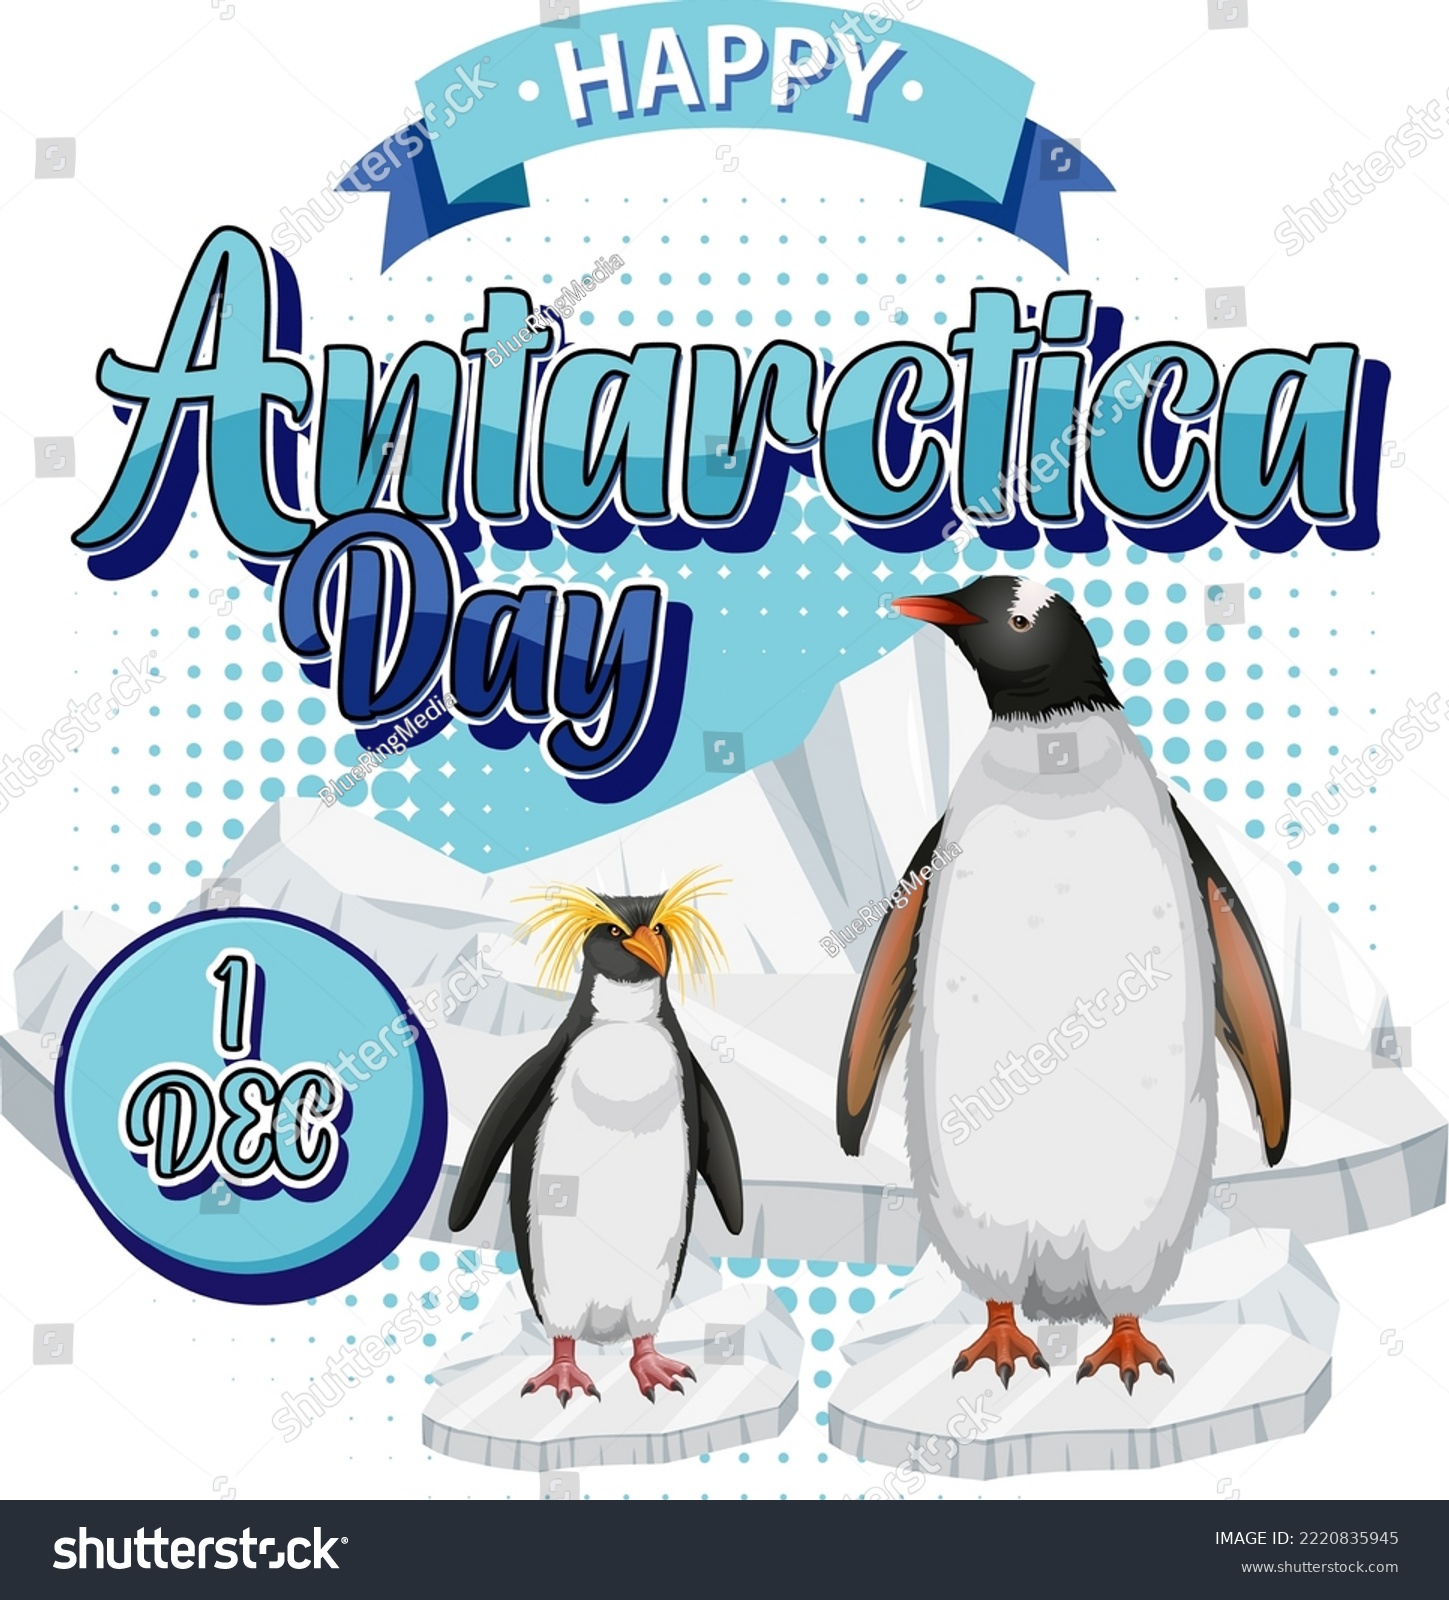 SVG of Antarctica day text with penguin illustration svg